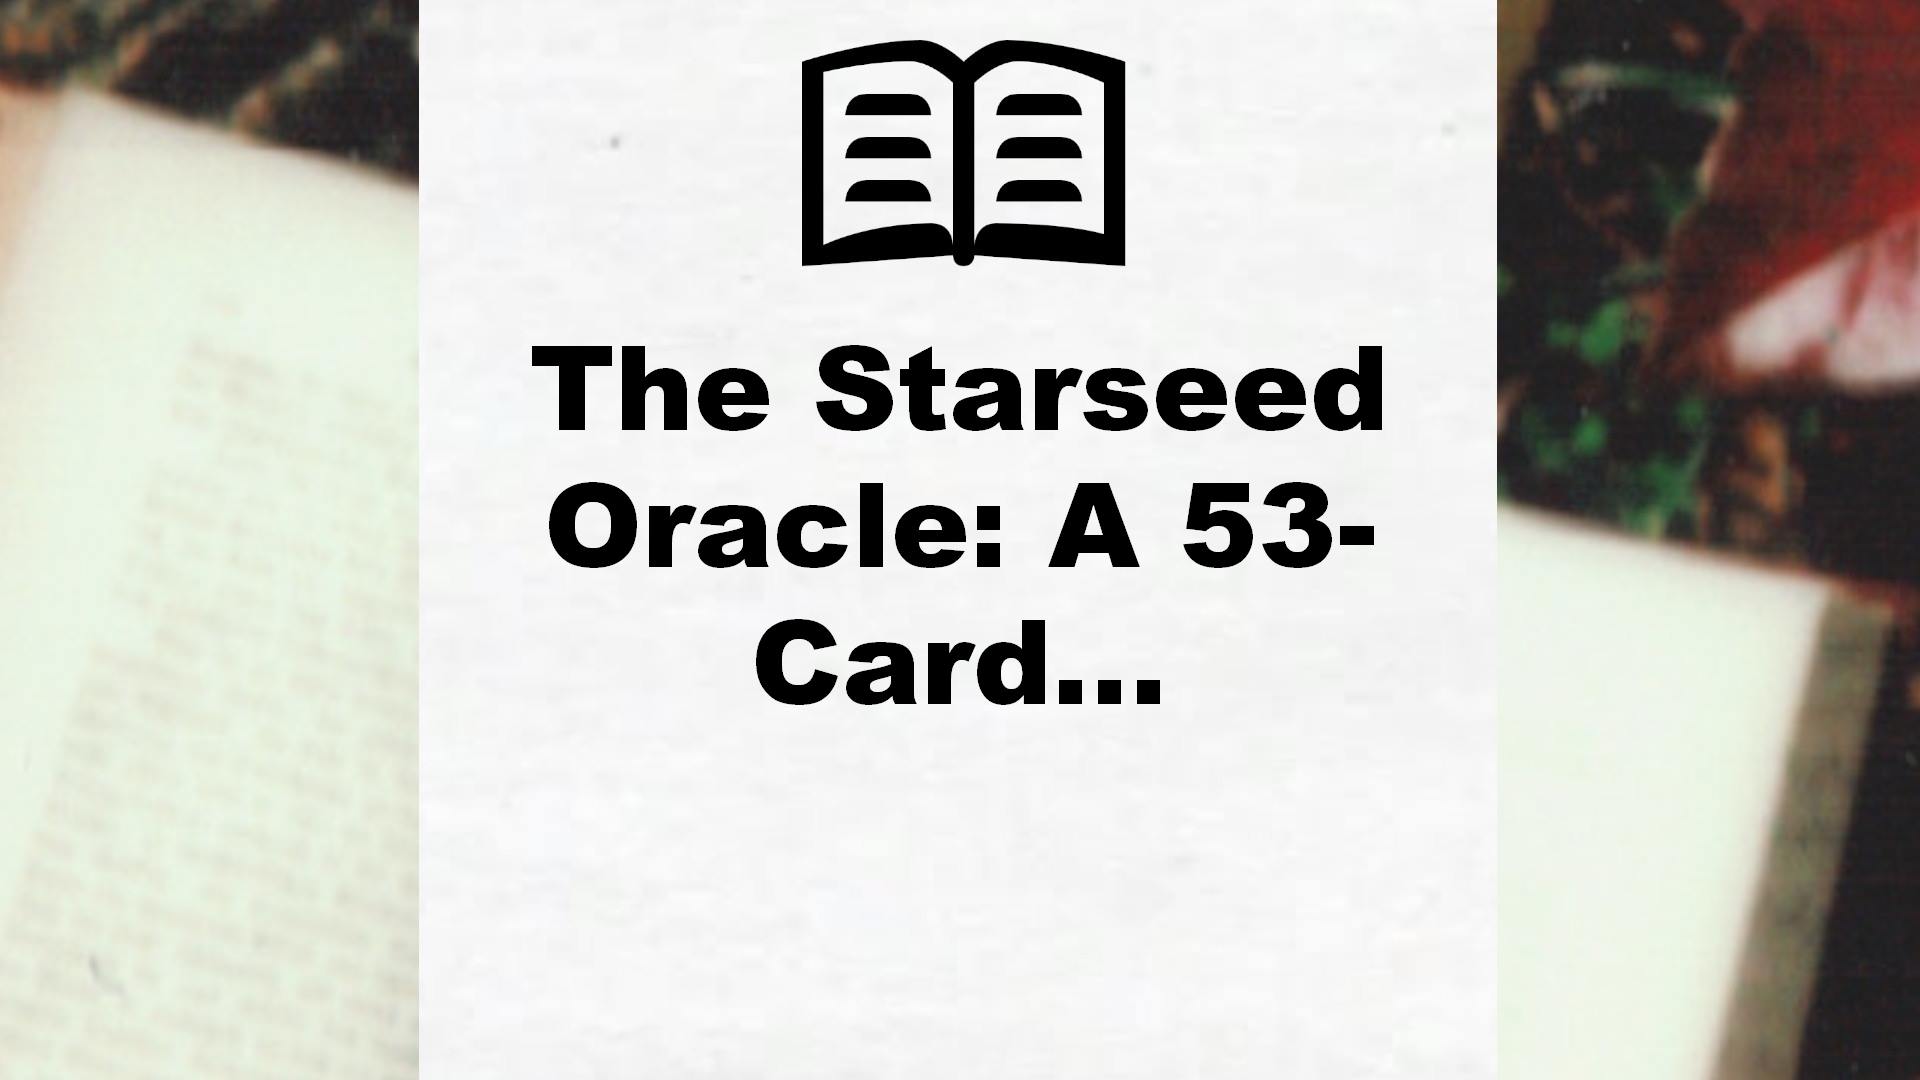 The Starseed Oracle: A 53-Card… – Critique